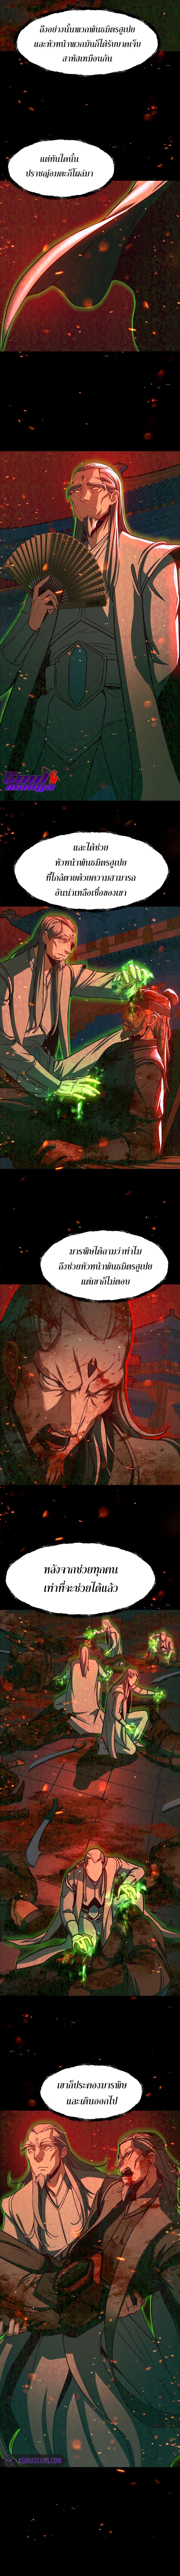 In the Night Consumed by Blades, I Walk เธ•เธญเธเธ—เธตเน24 (8)